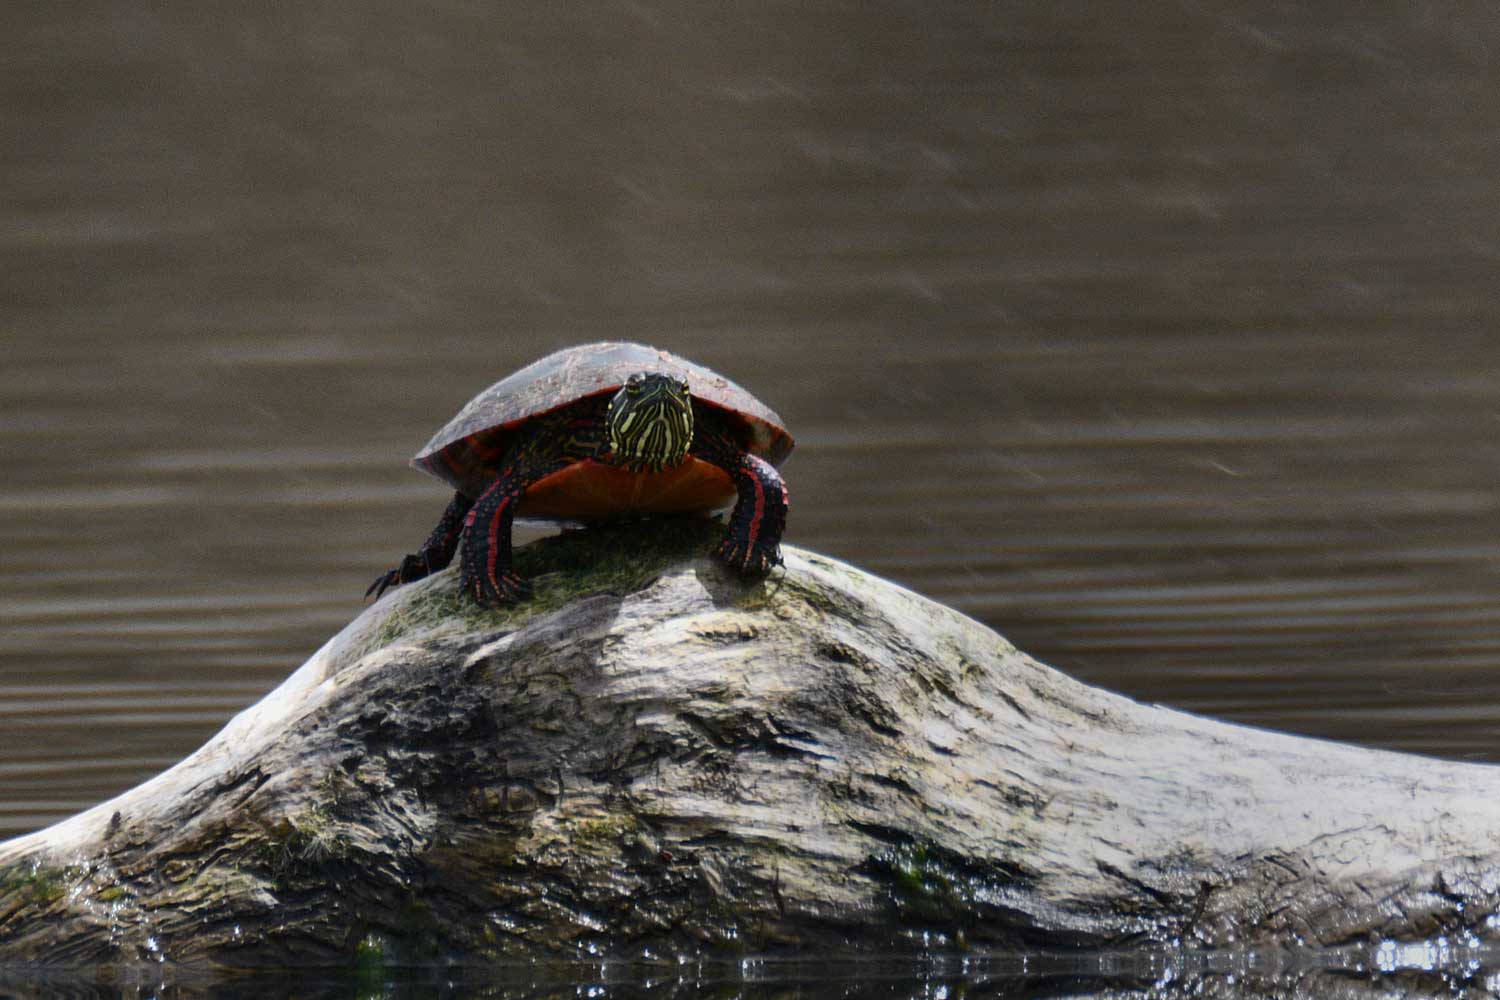 A painted turtle perched on a log in the water.